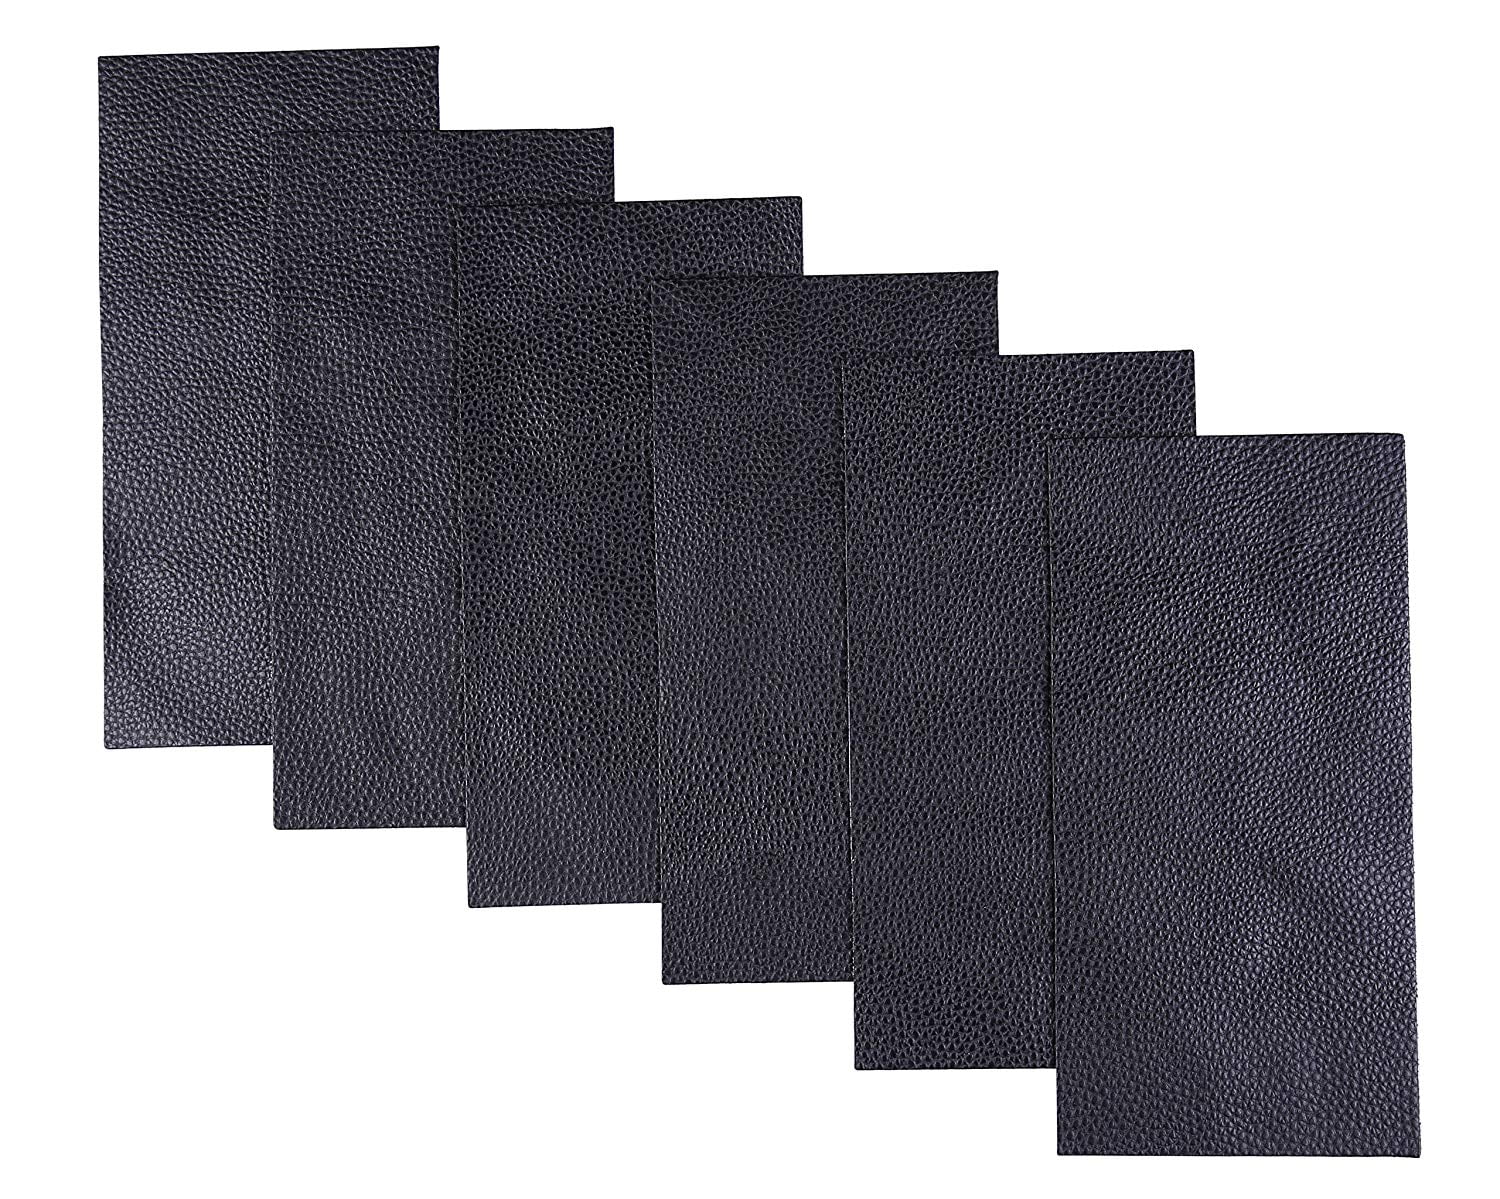 6 Pcs Leather Repair Patch Pleather, How To Patch Fake Leather Couch